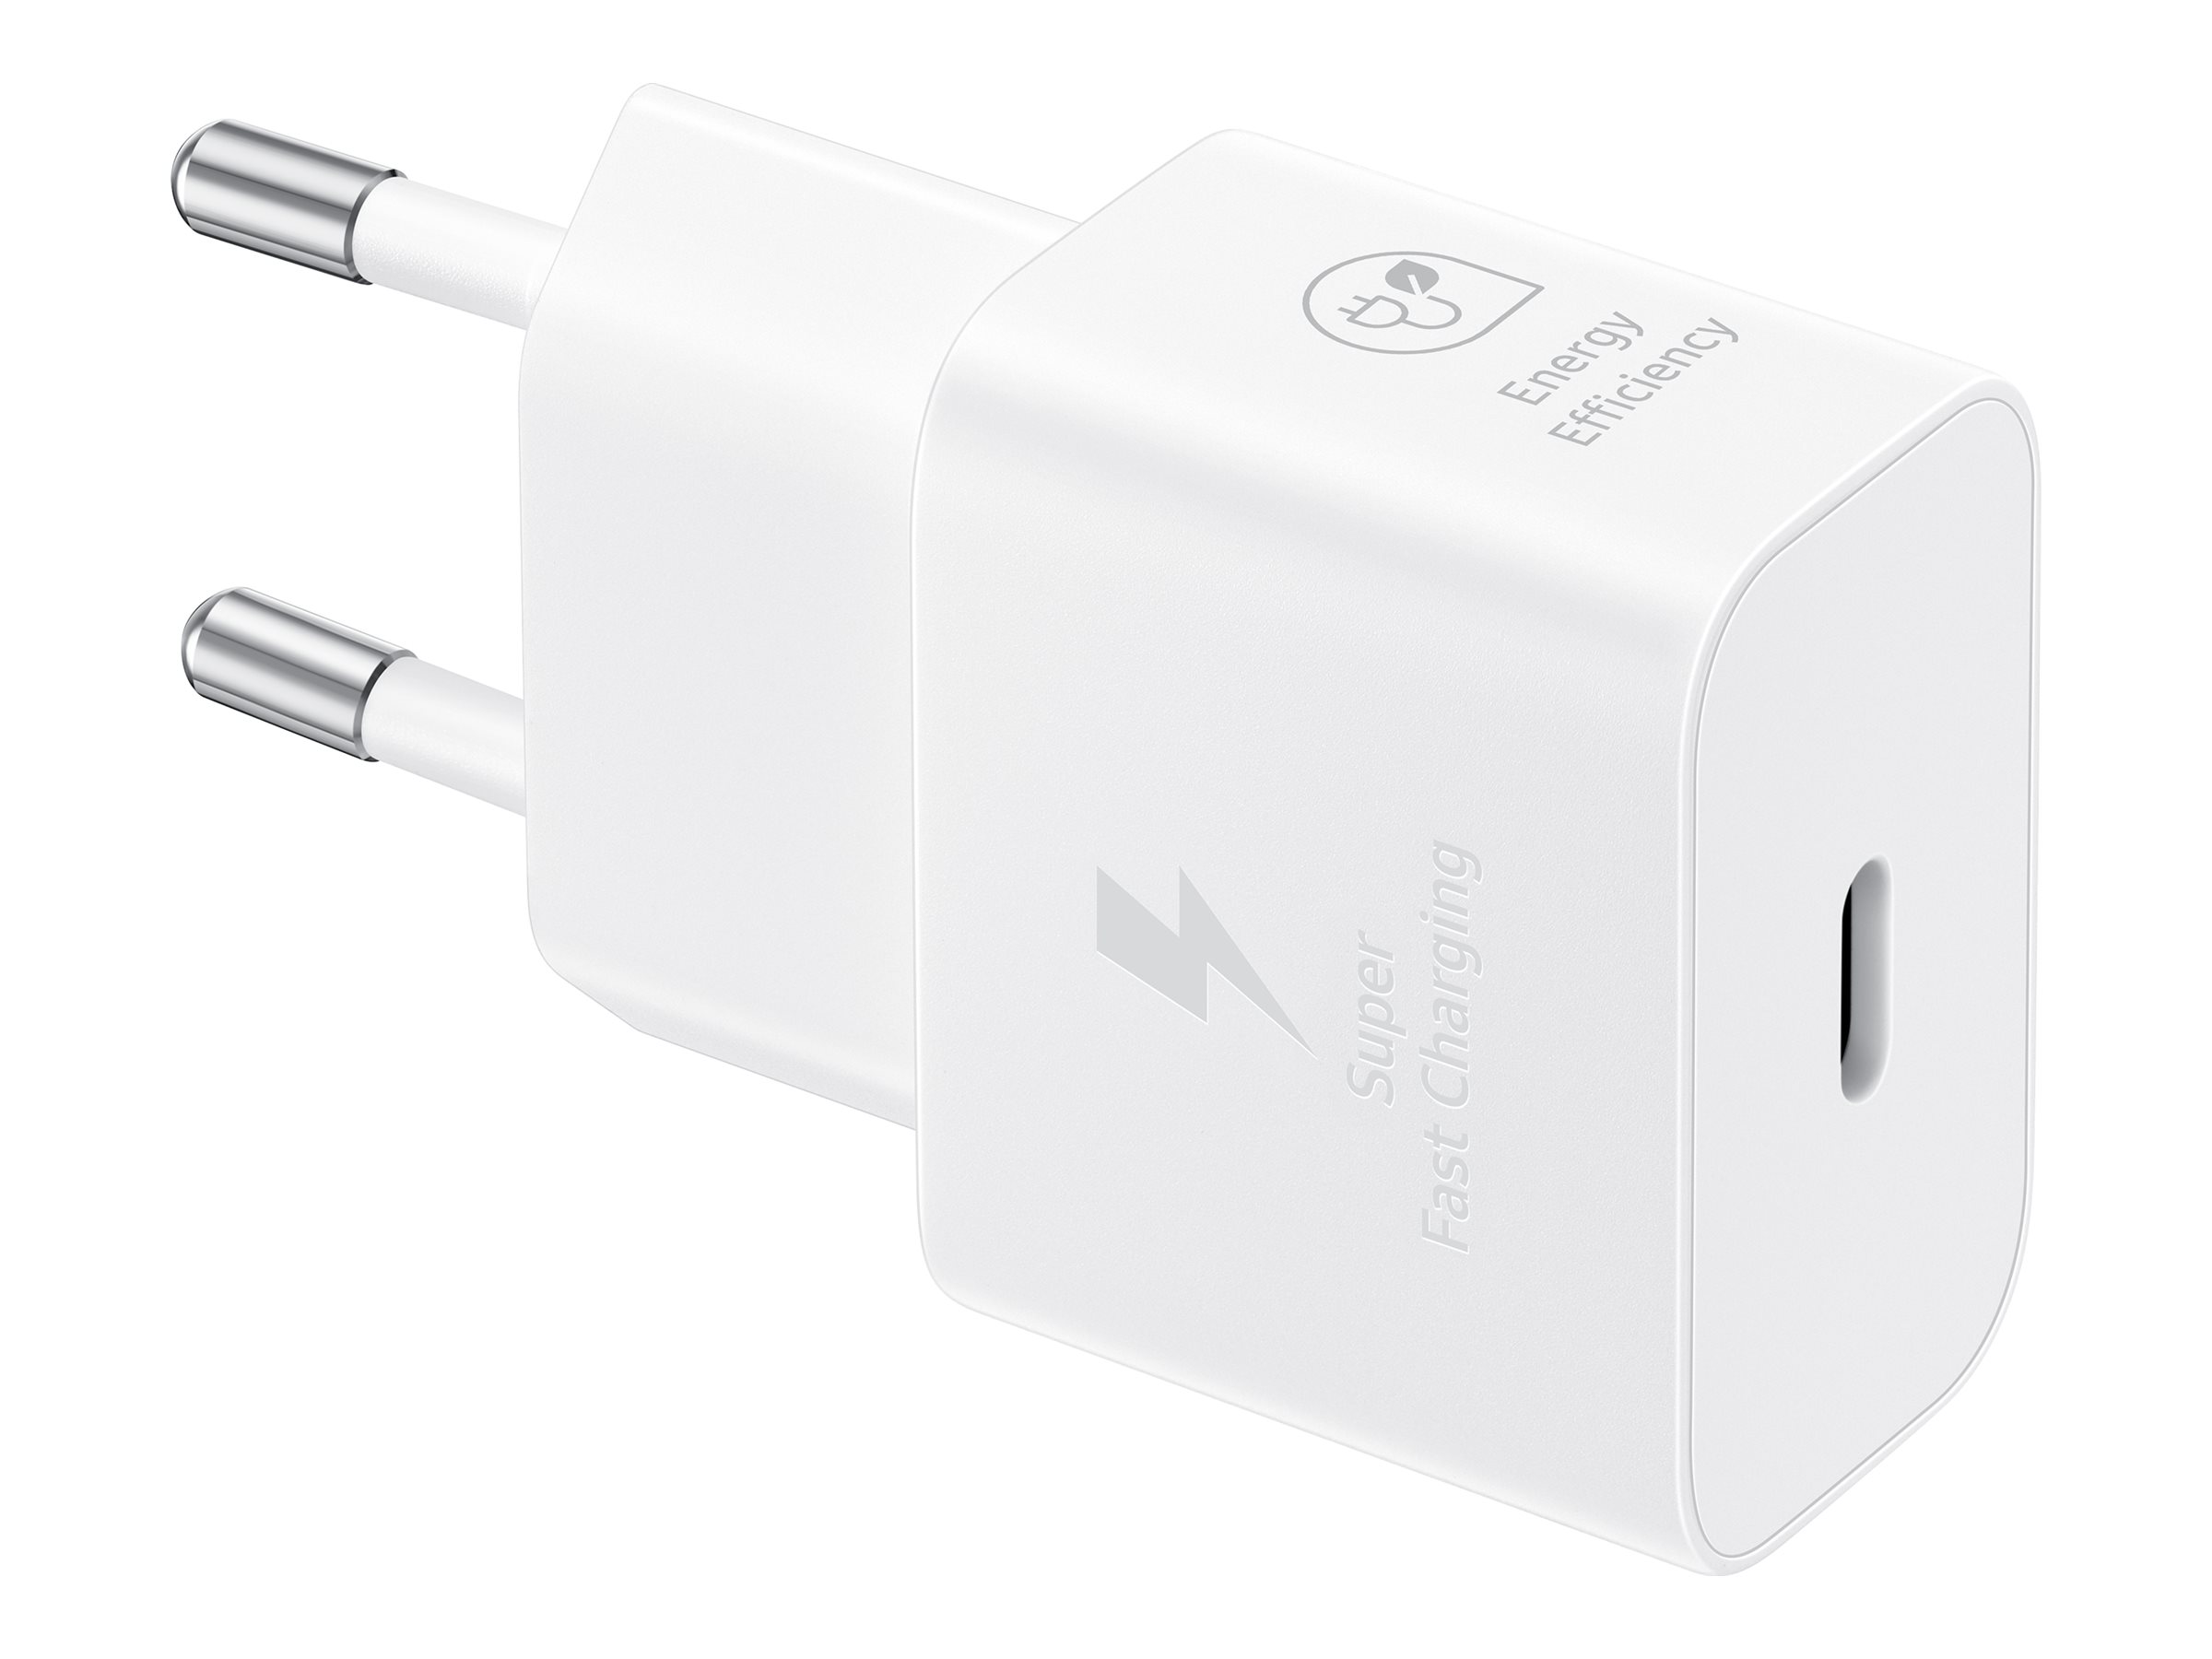 Samsung Galaxy Power Adapter USB Type C 25W w/o Cable White